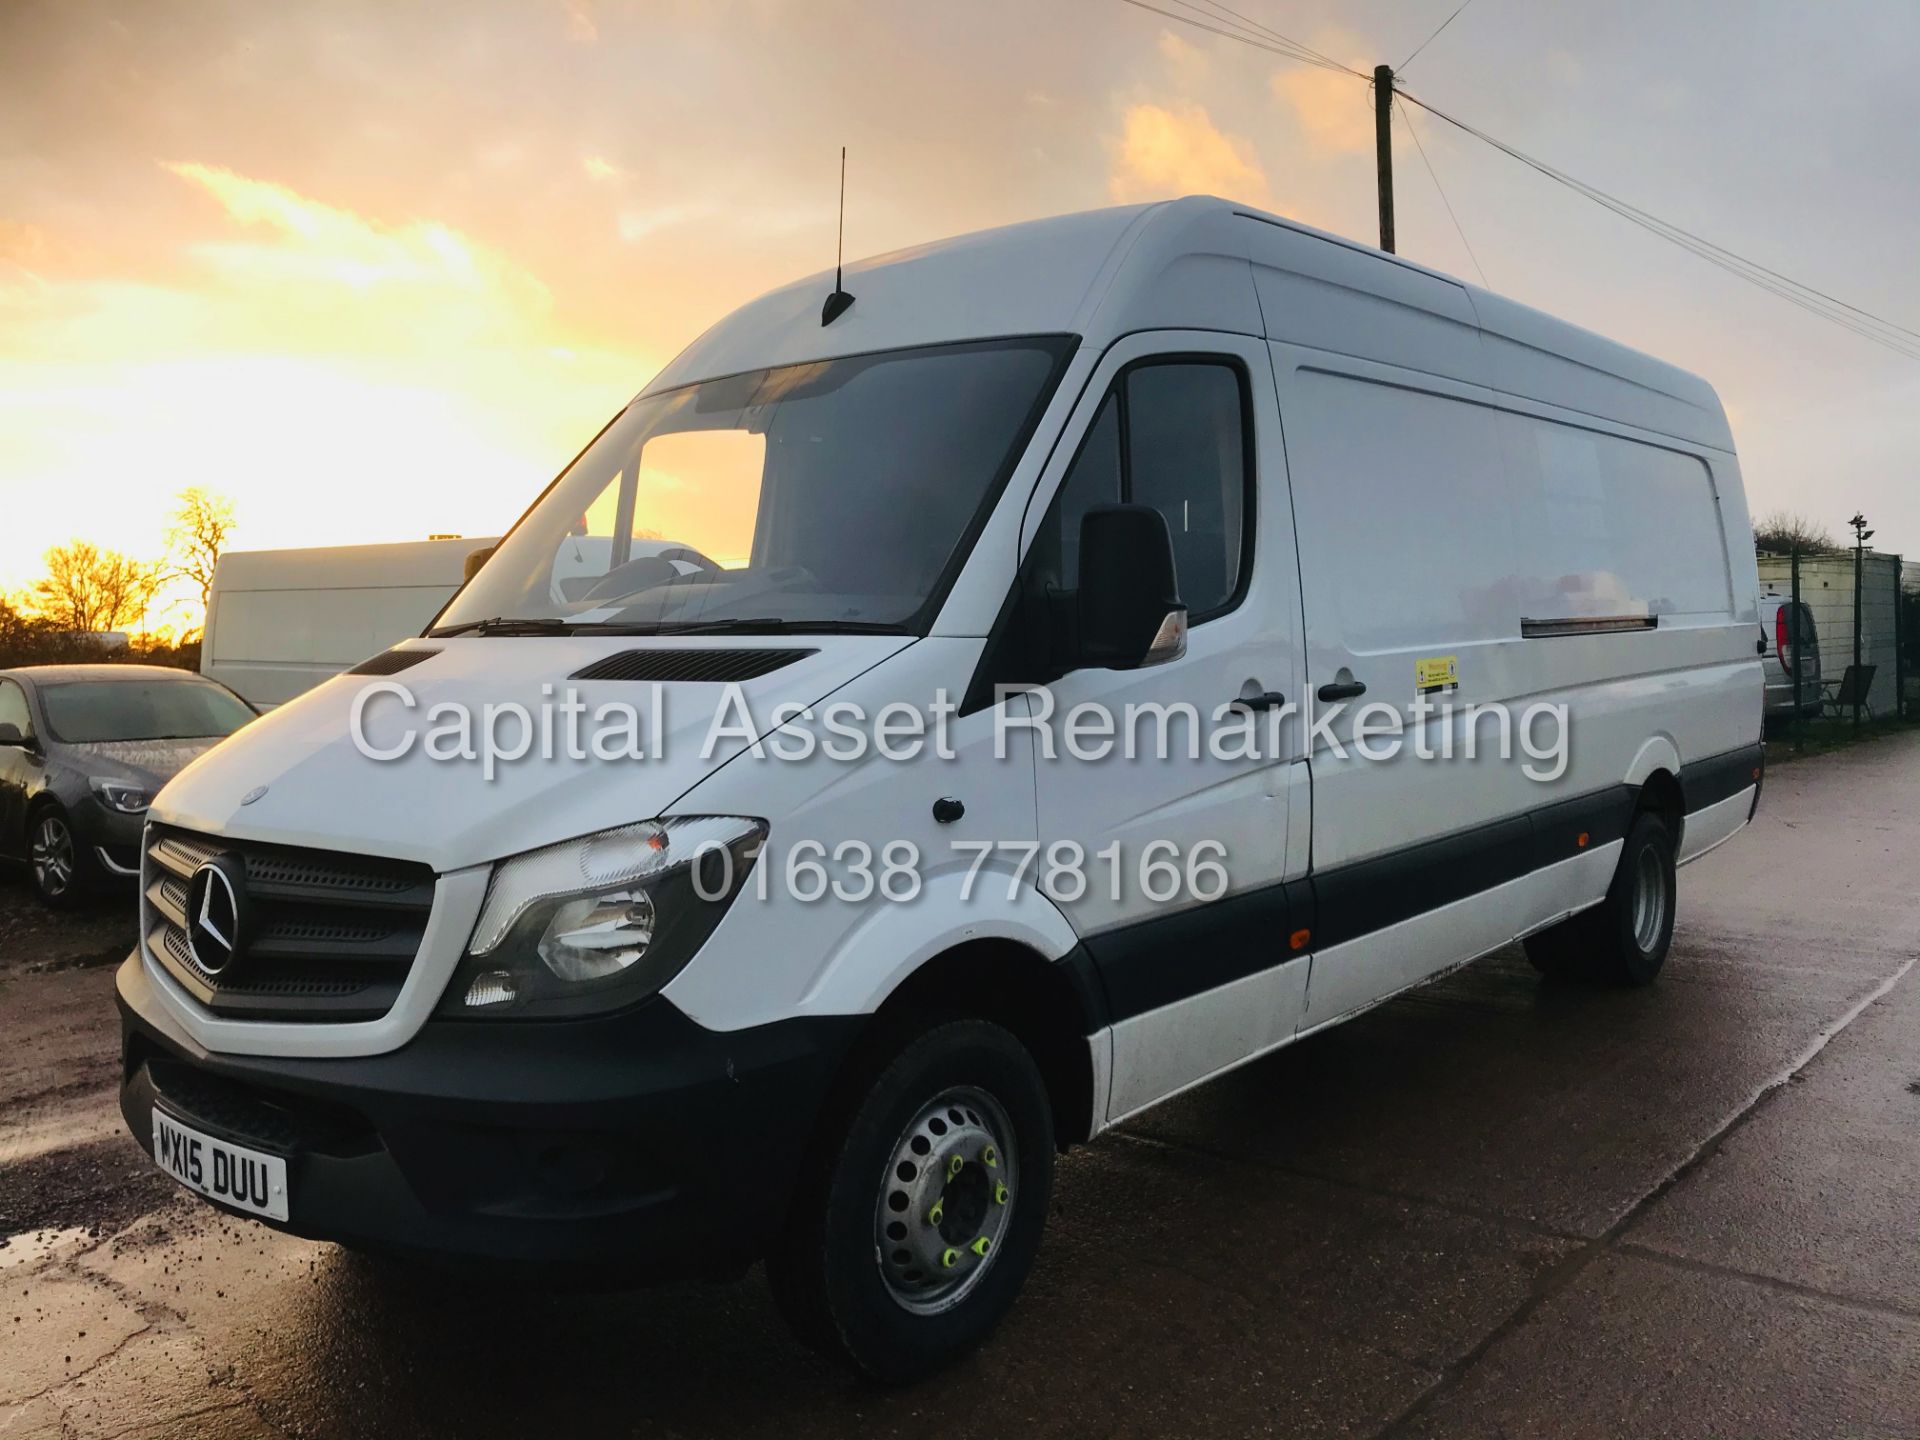 (On Sale) MERCEDES SPRINTER 513CDI "XLWB - TWIN REAR WHEELS" 1 OWNER (2015) *IDEAL CONVERSION* - Image 5 of 15